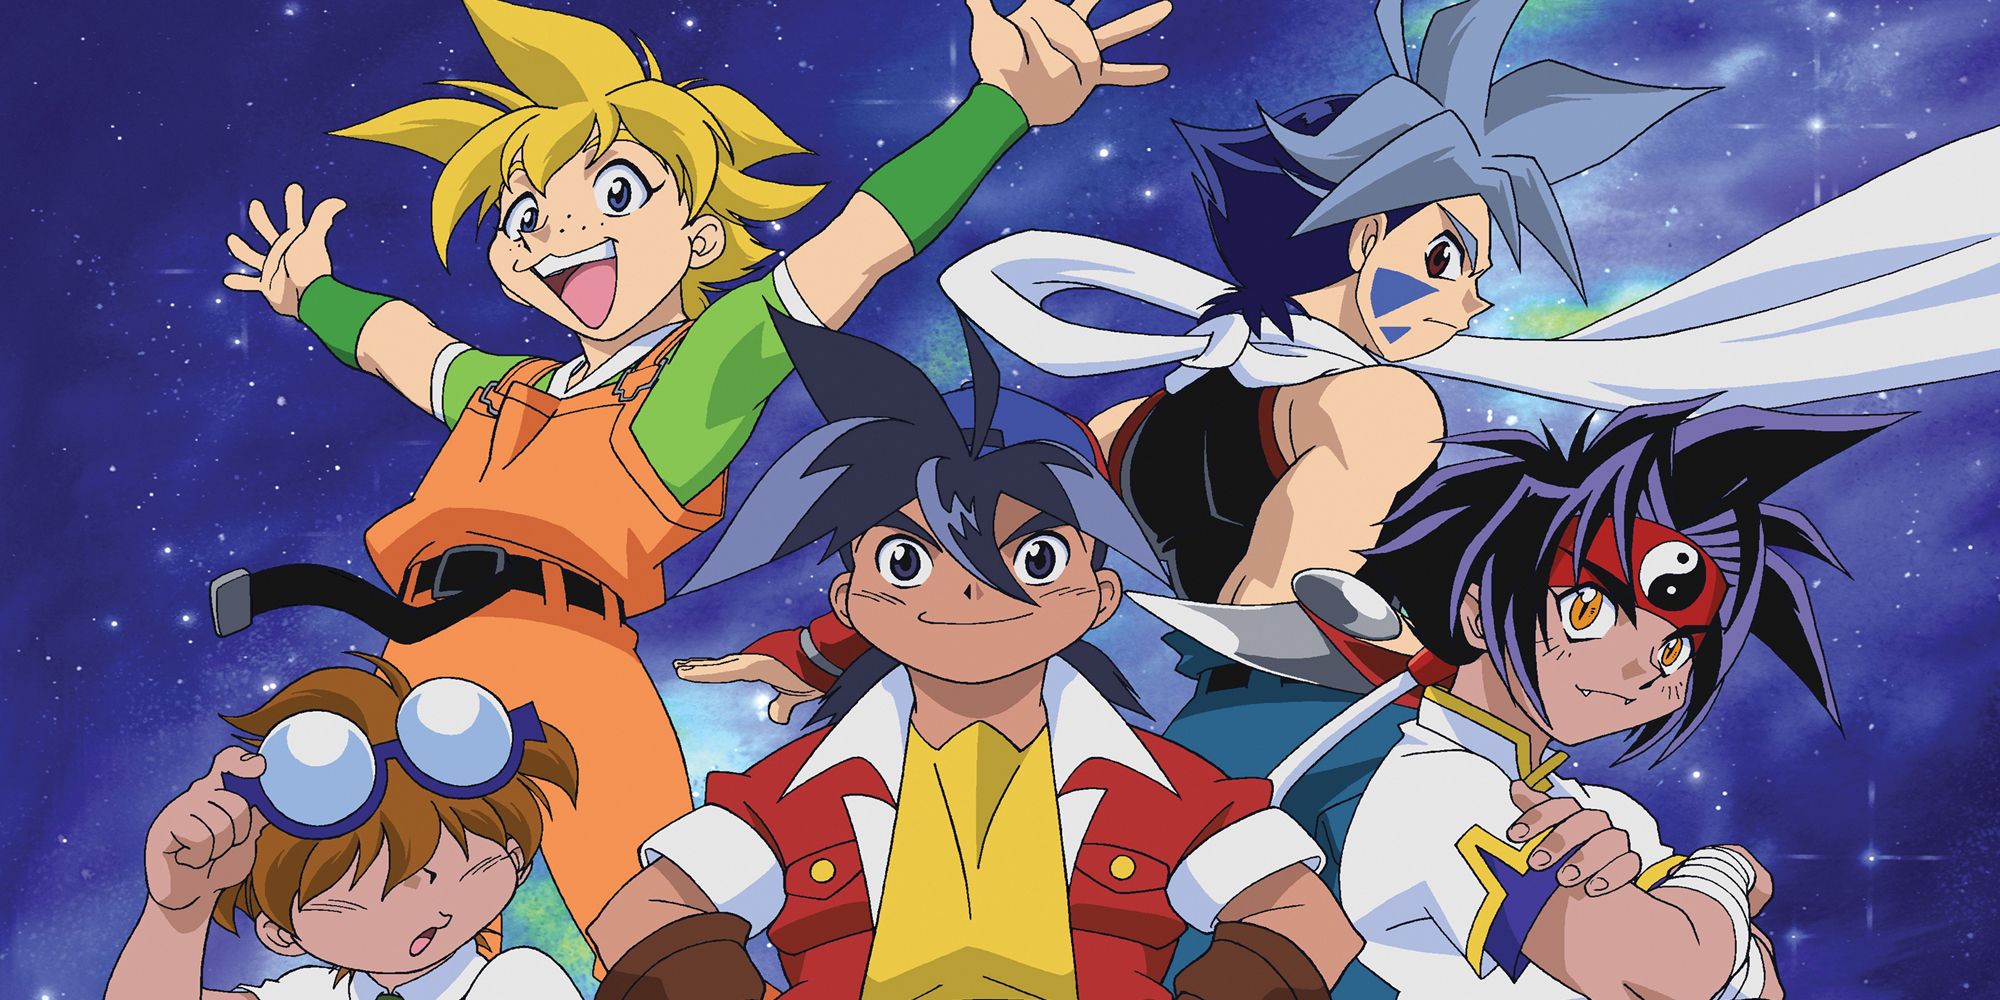 15 Things You Didn’t Know About Beyblade